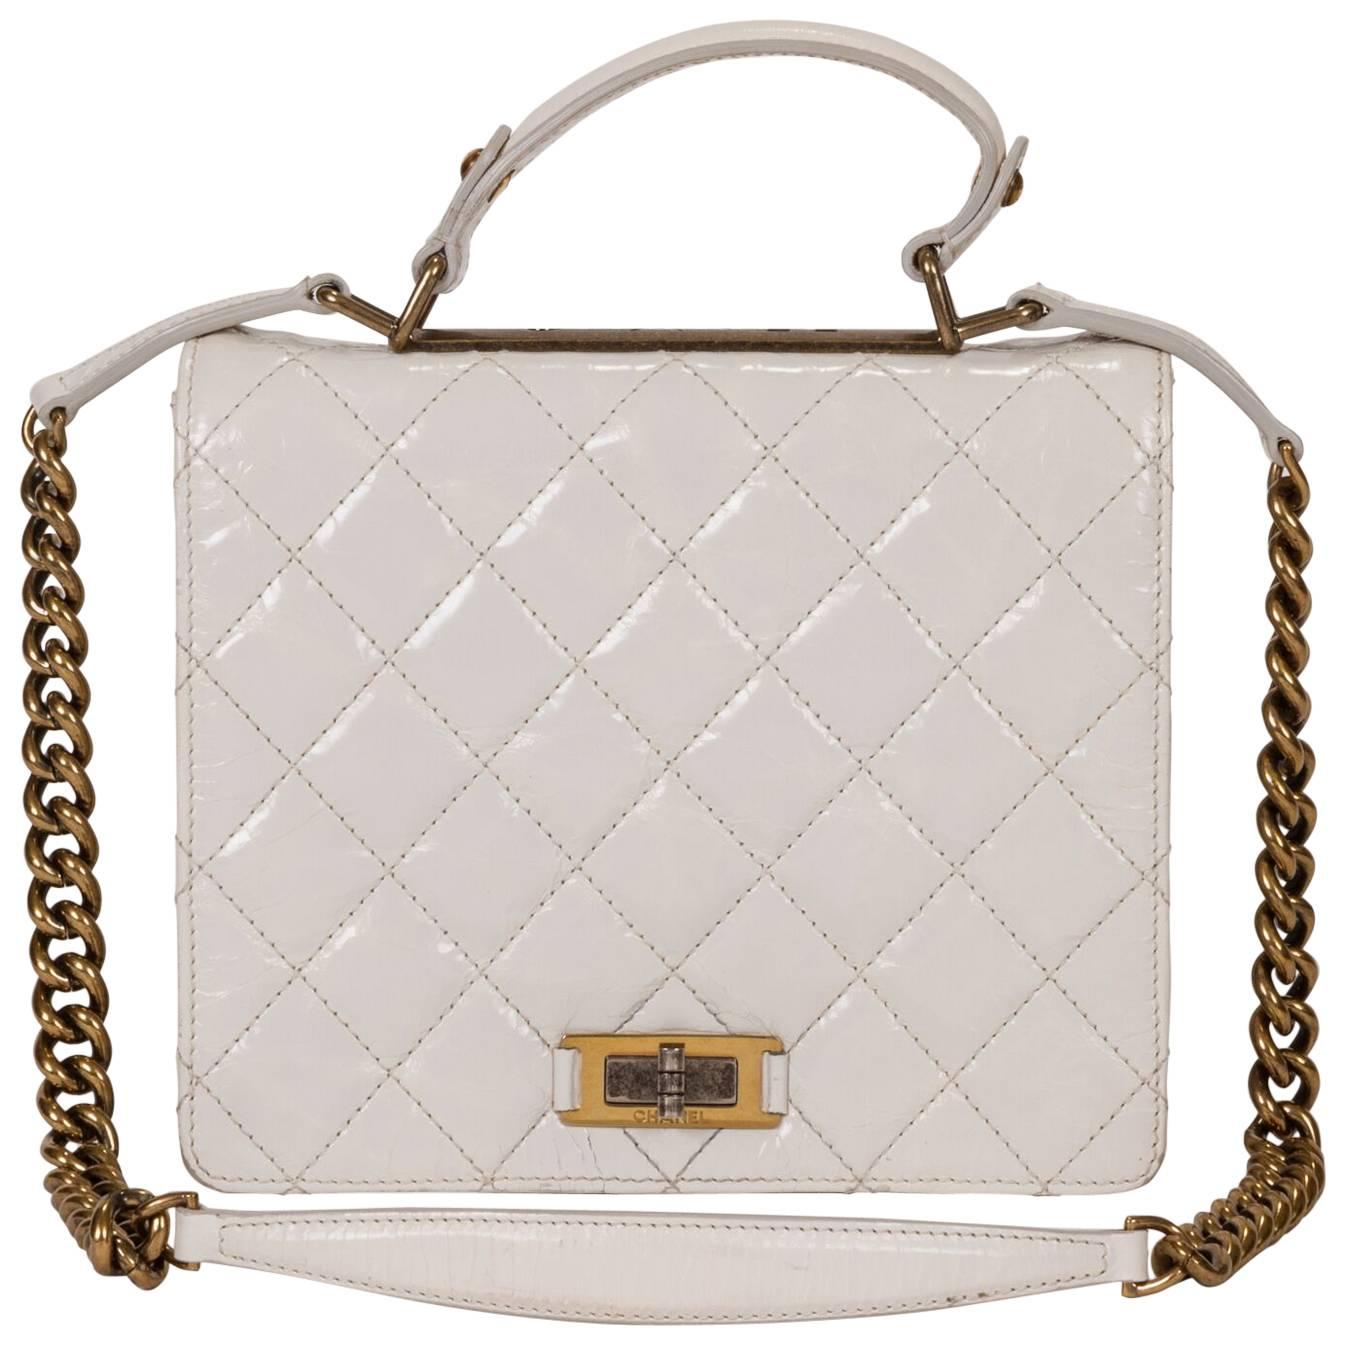 Chanel White Distressed Leather Boy Bag